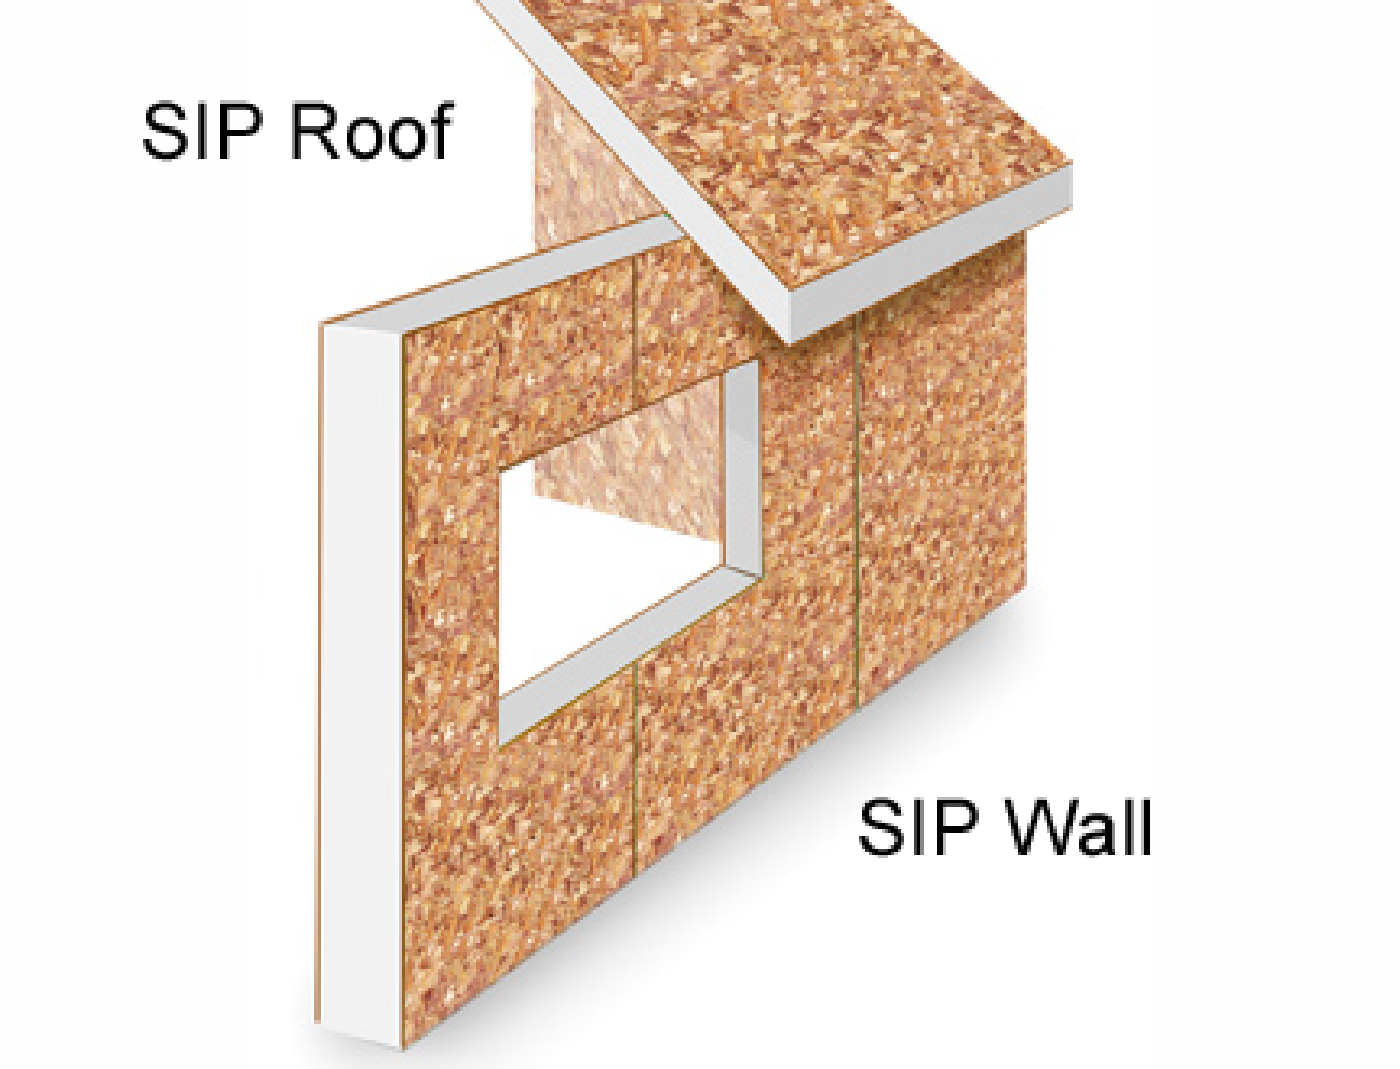 Structural Insulated Panel (SIP)